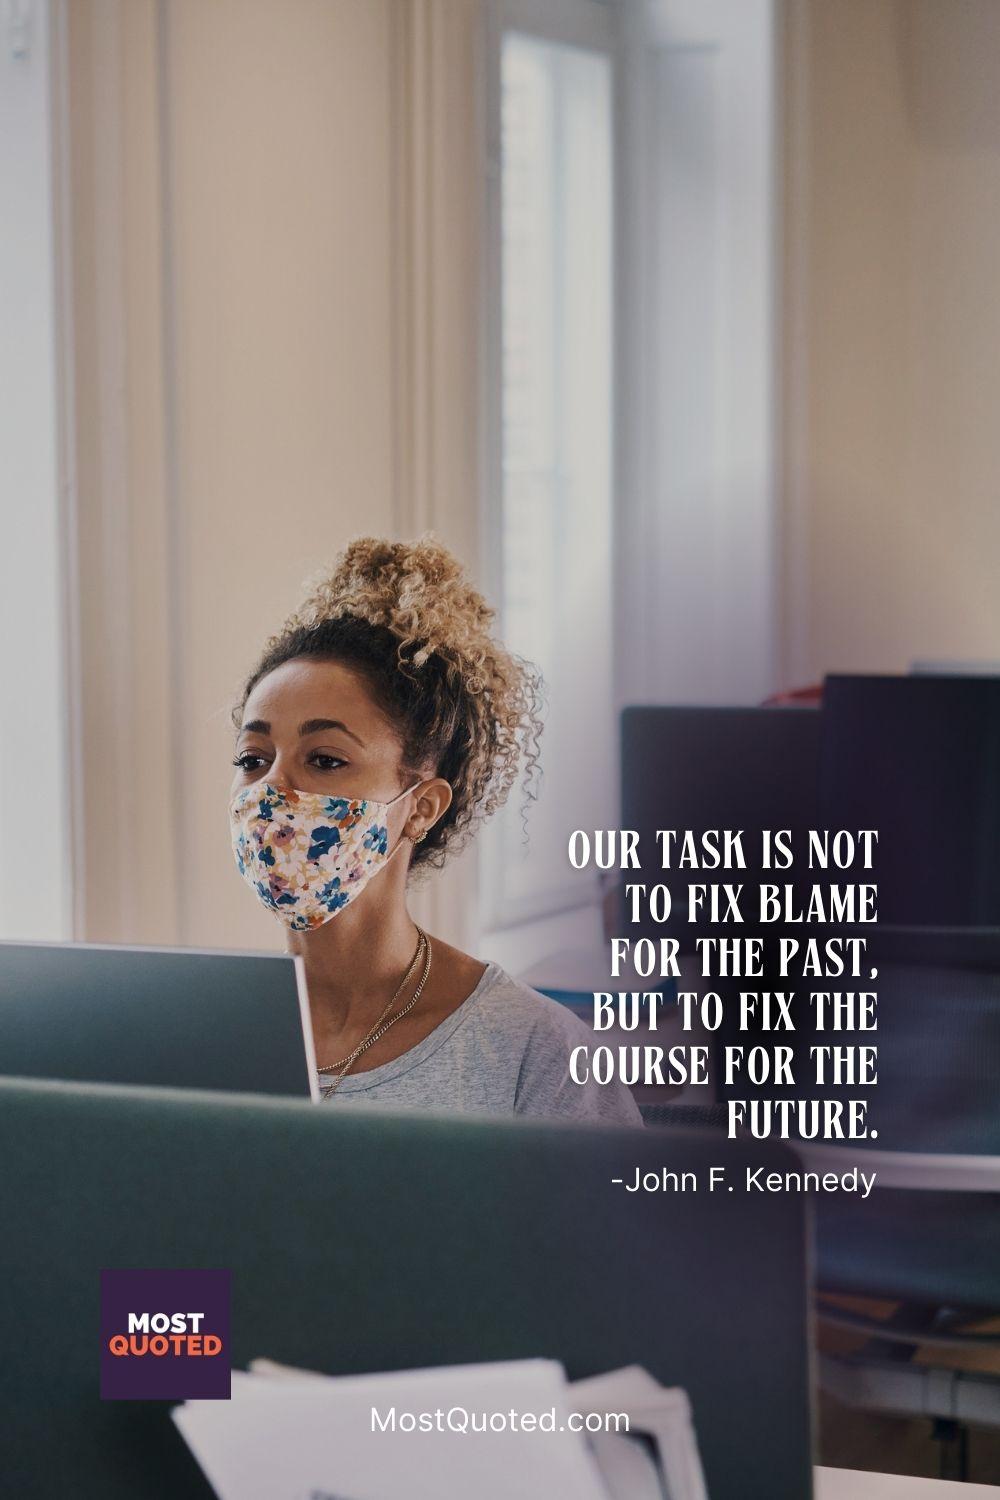 Our task is not to fix blame for the past, but to fix the course for the future. - John F. Kennedy